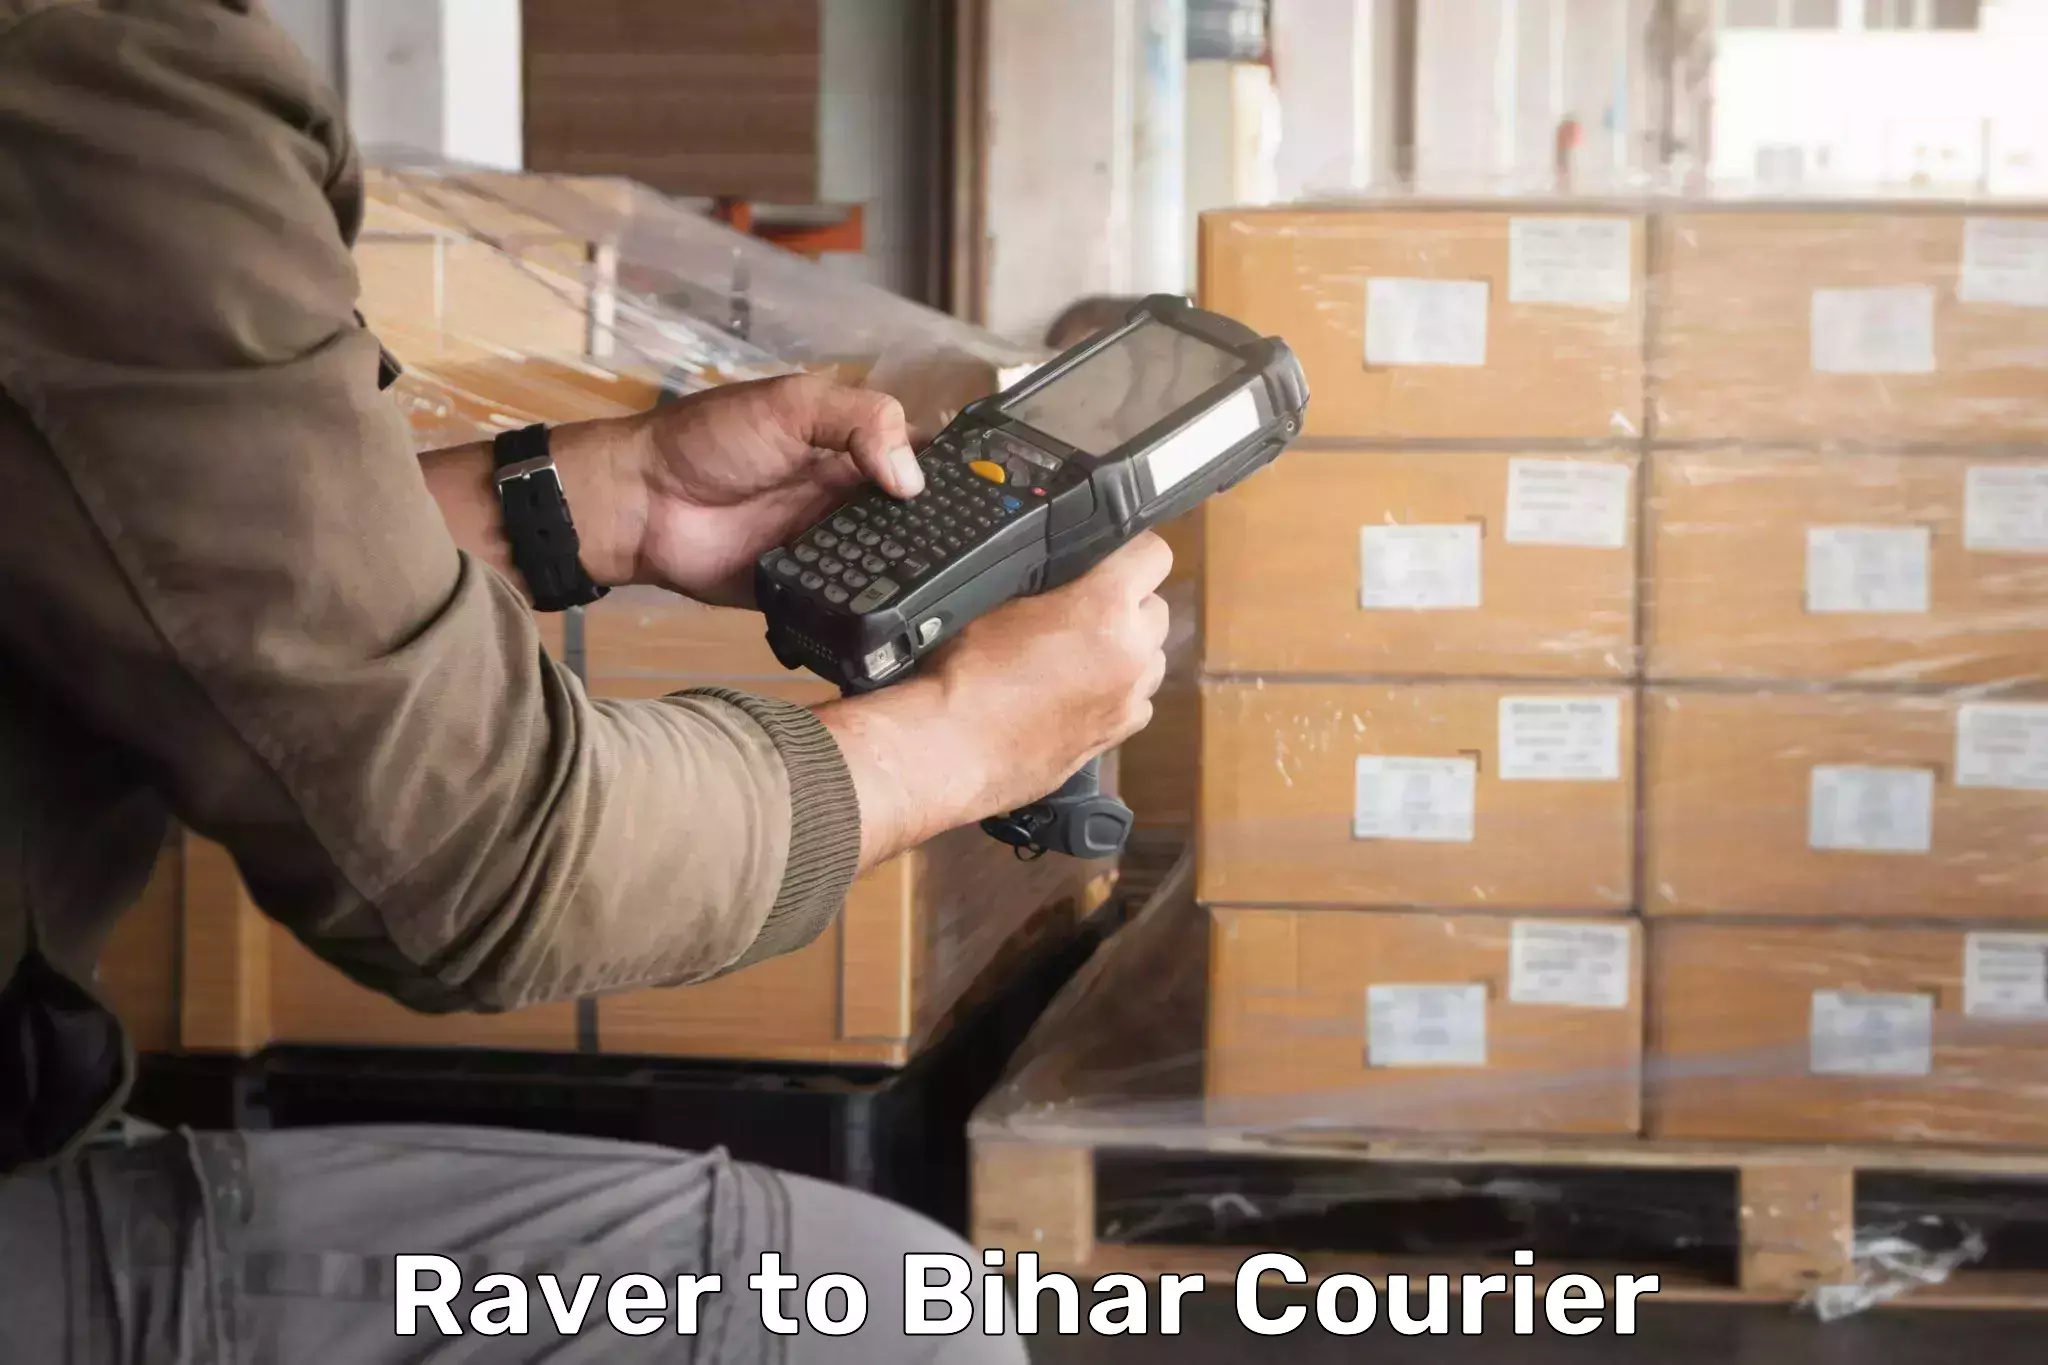 Courier service innovation in Raver to Bakhri